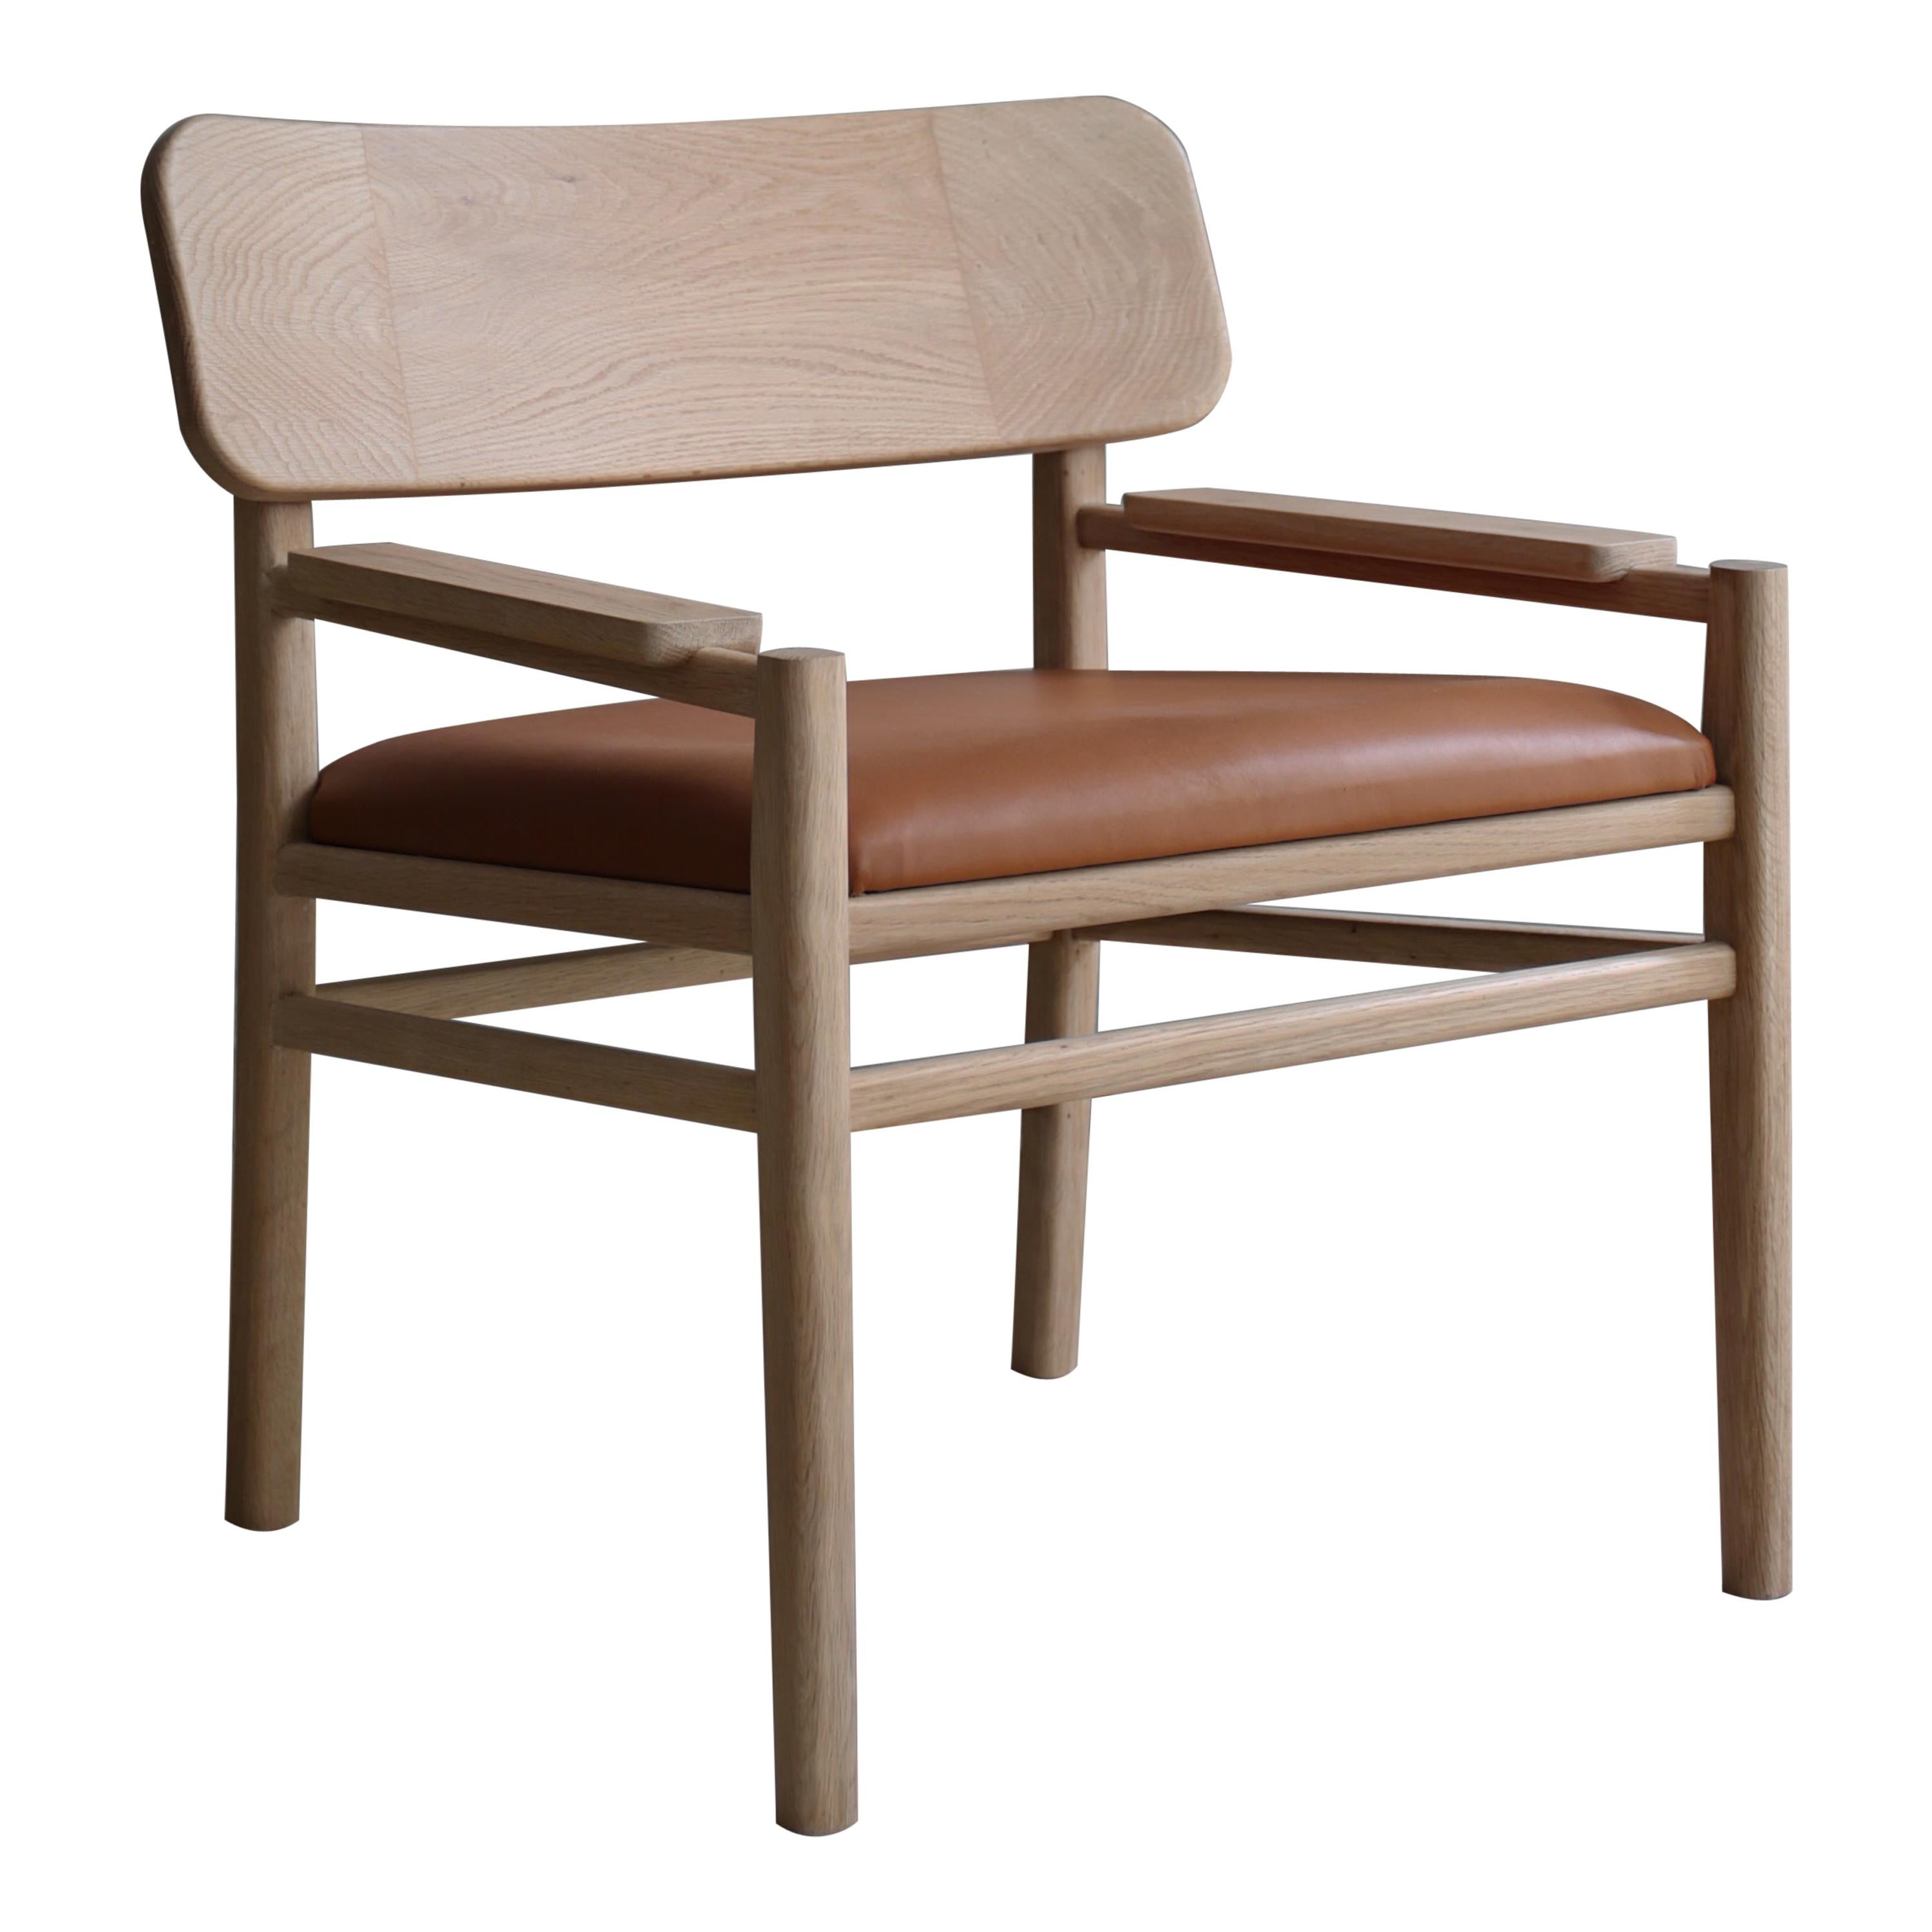 XVI, White Oak Lounge Chair with Leather Seat by Joel Escalona